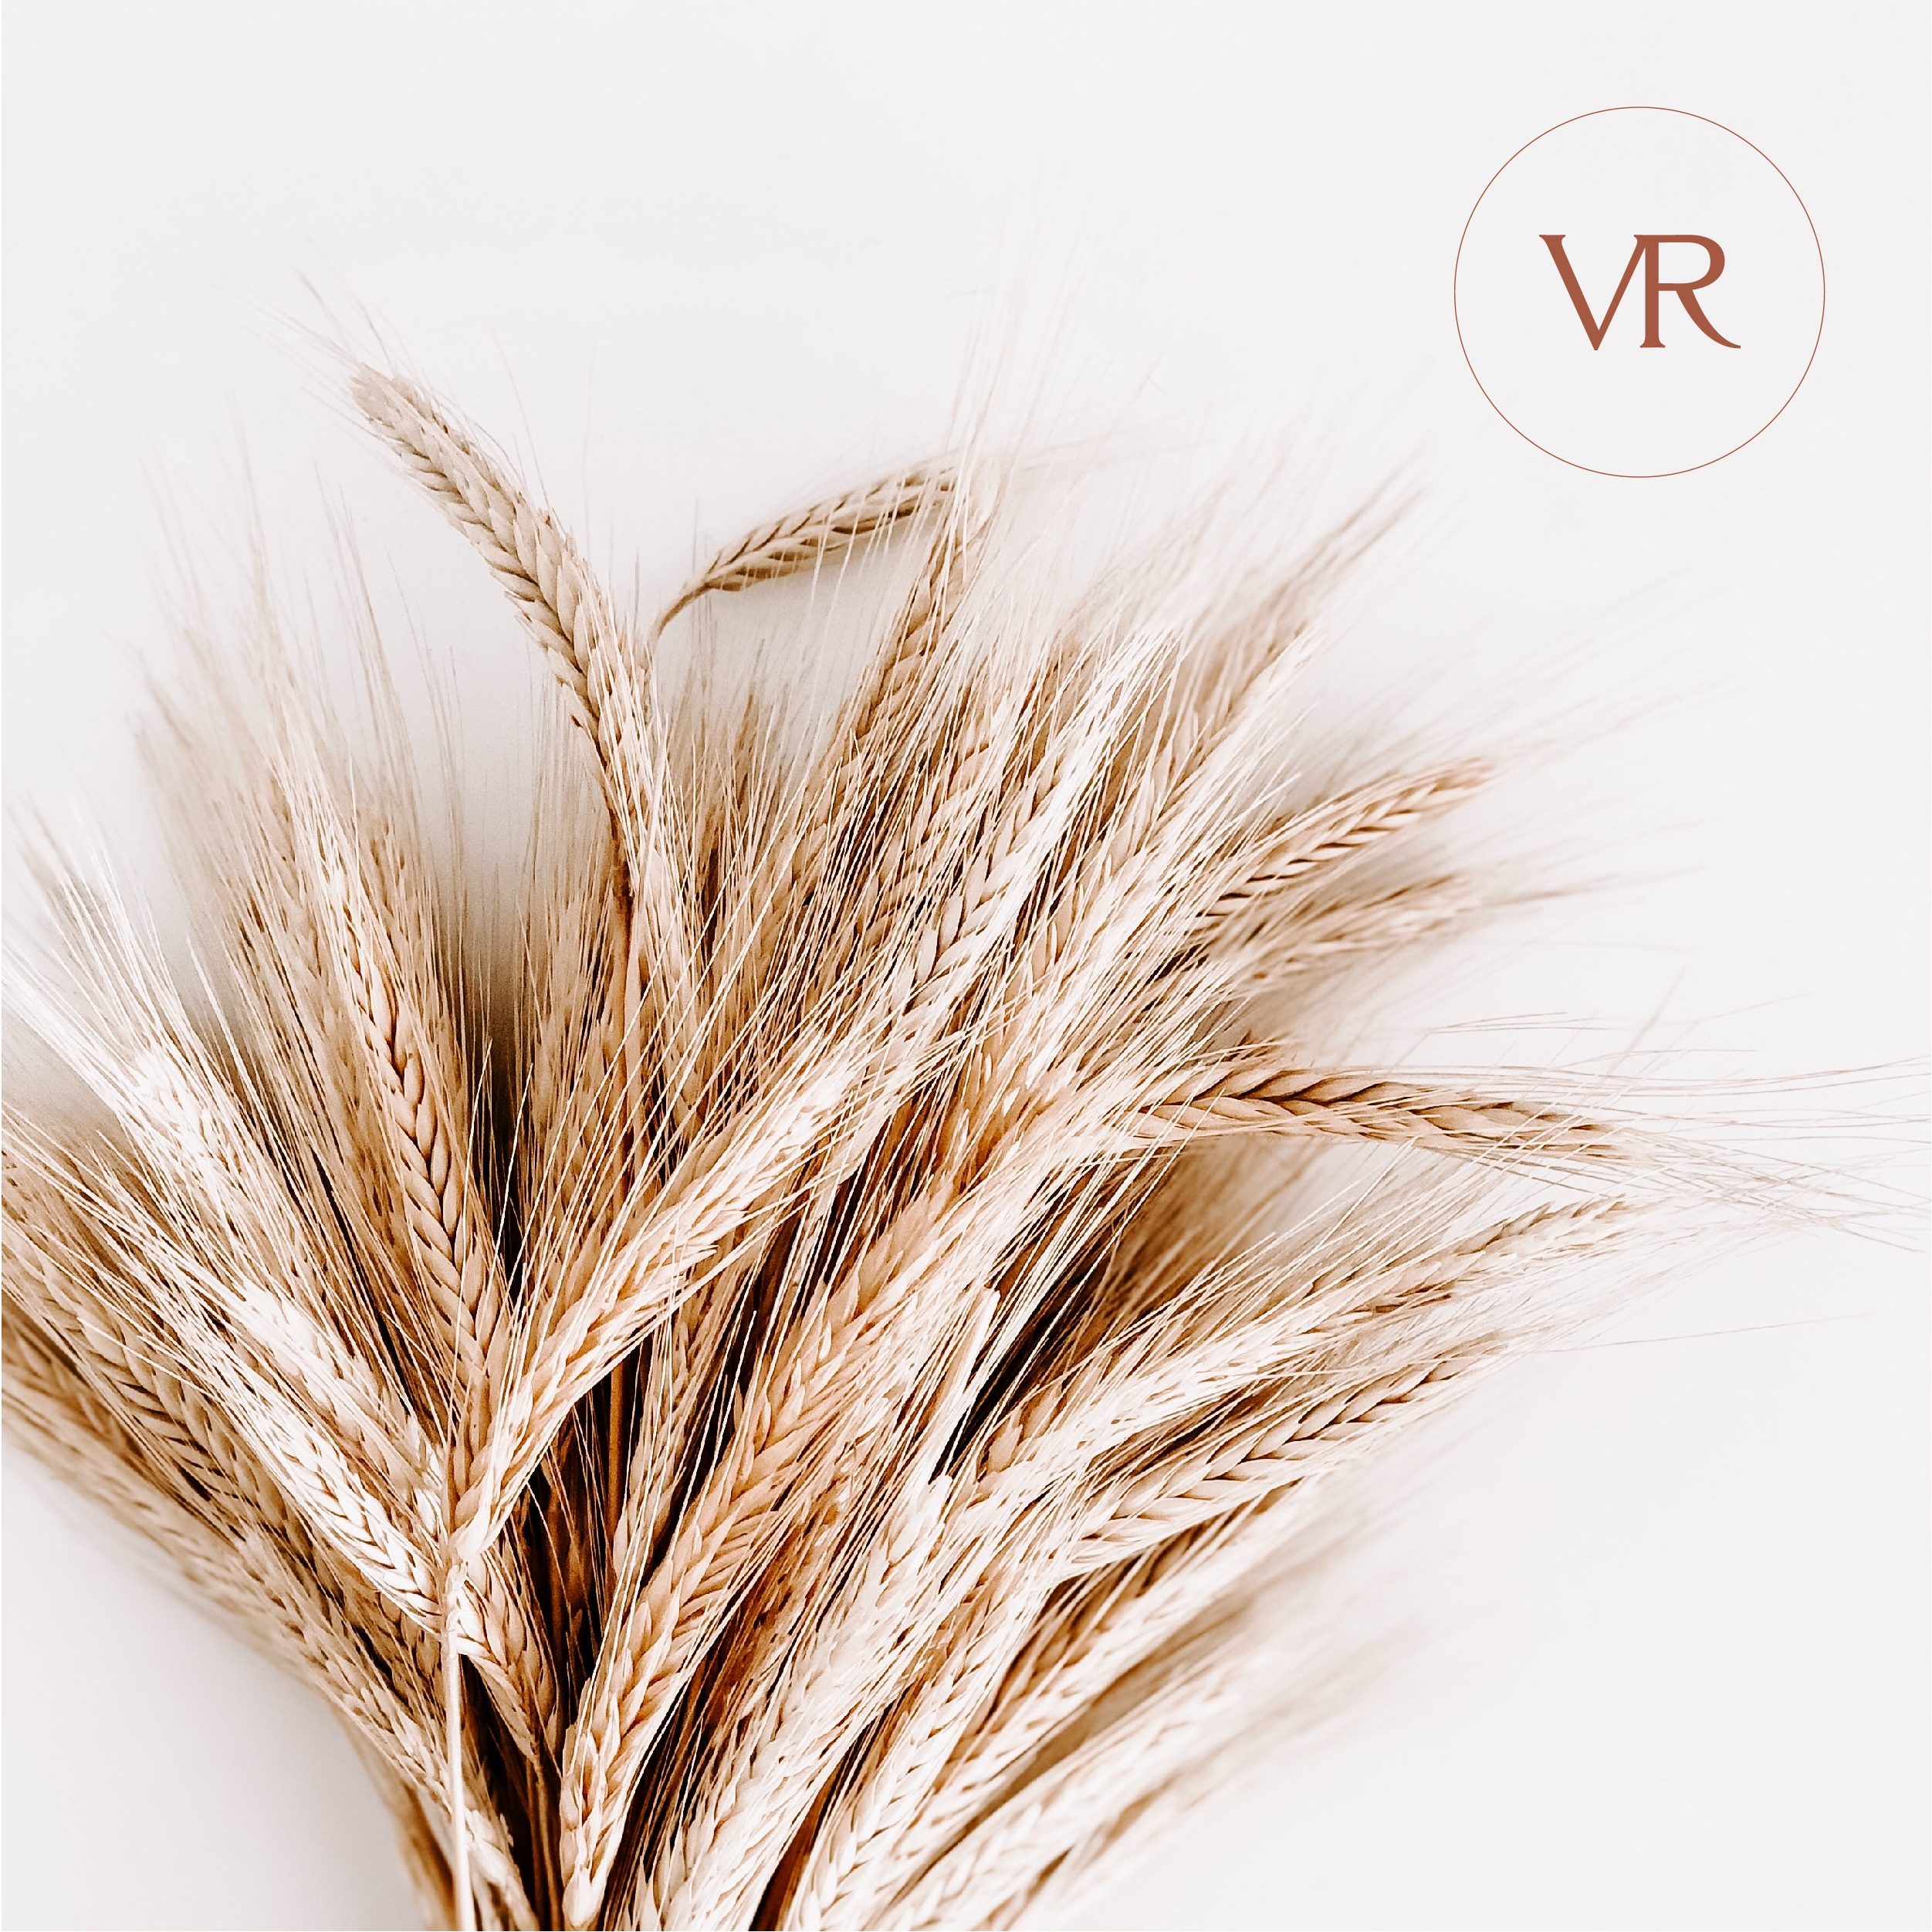 wheat pic with vr